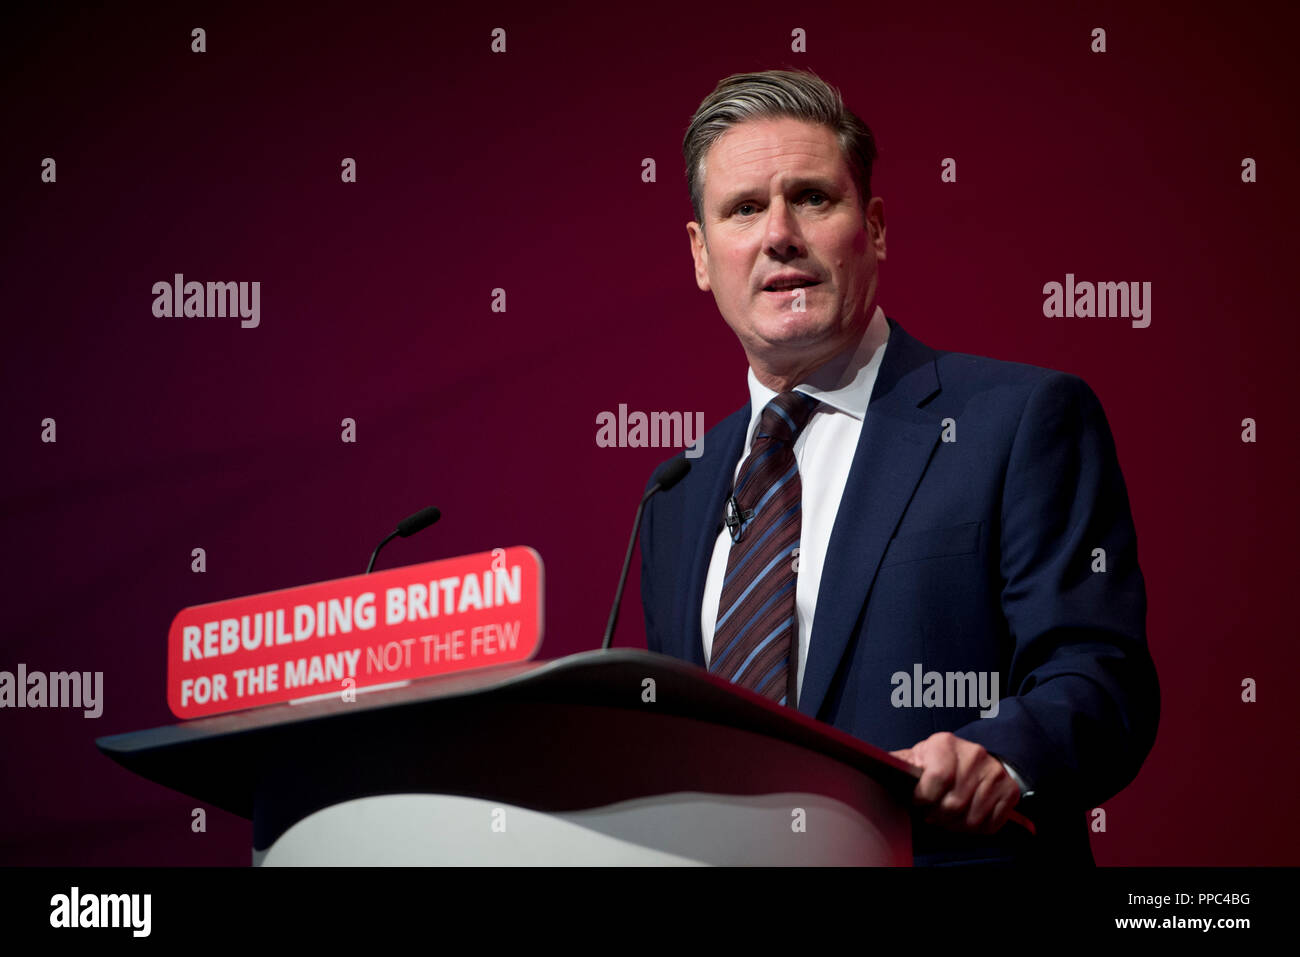 Liverpool, UK. 25th September 2018. Keir Starmer, Shadow Secretary of State for Exiting the European Union and Labour MP for Holborn and St Pancras speaks at the Labour Party Conference in Liverpool. © Russell Hart/Alamy Live News. Stock Photo